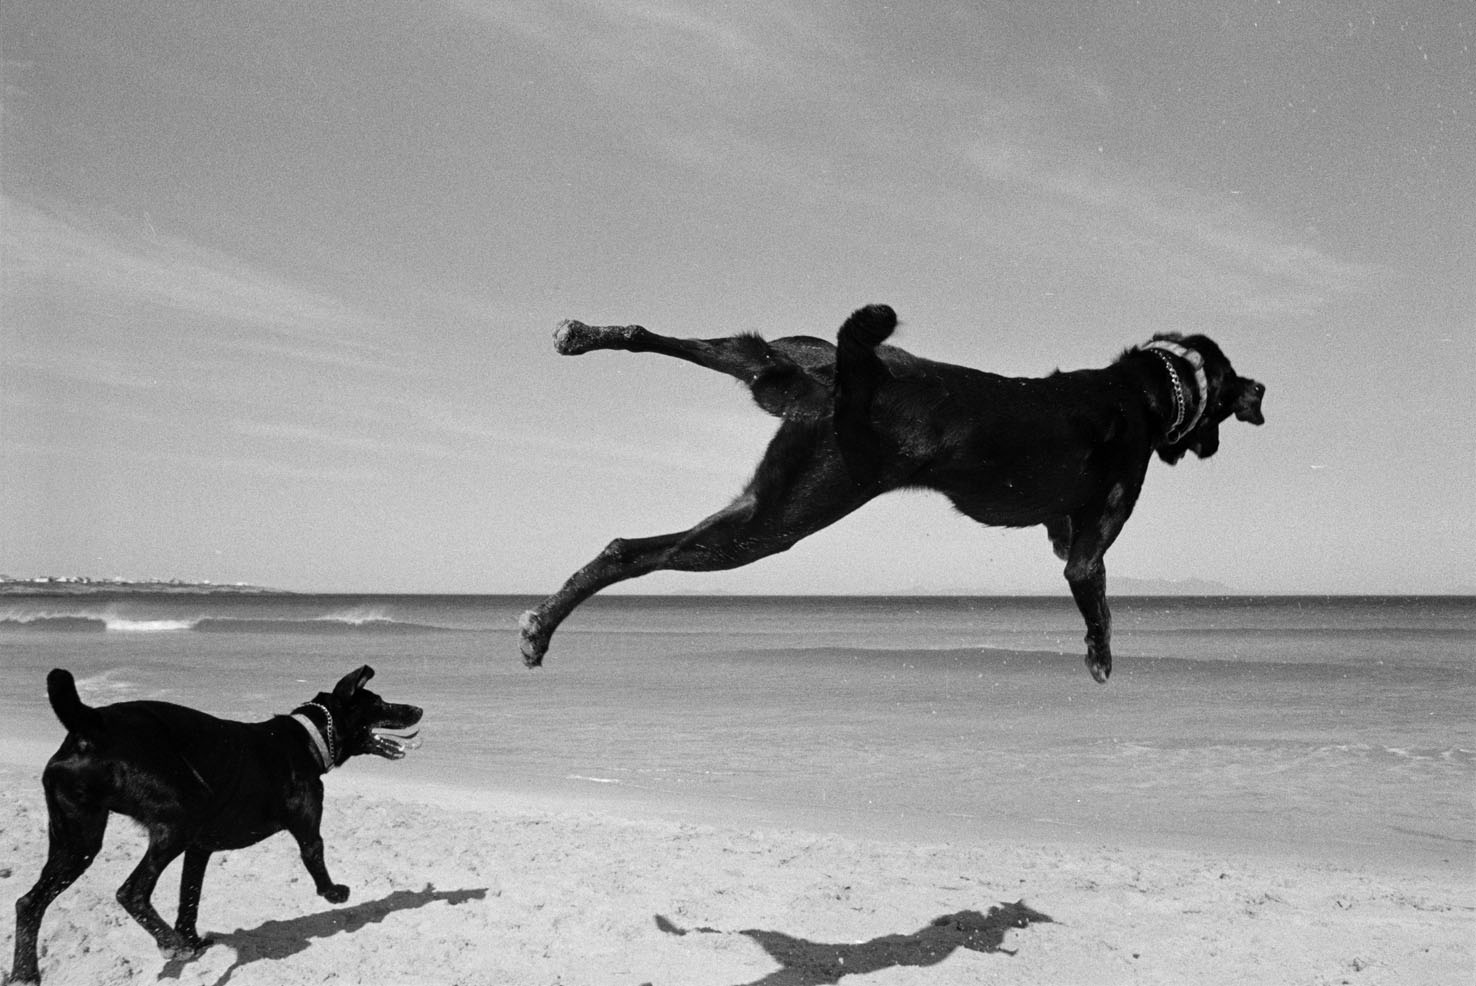  Two Dogs, Pringle Bay, Cape, South Africa. 1999/2000 